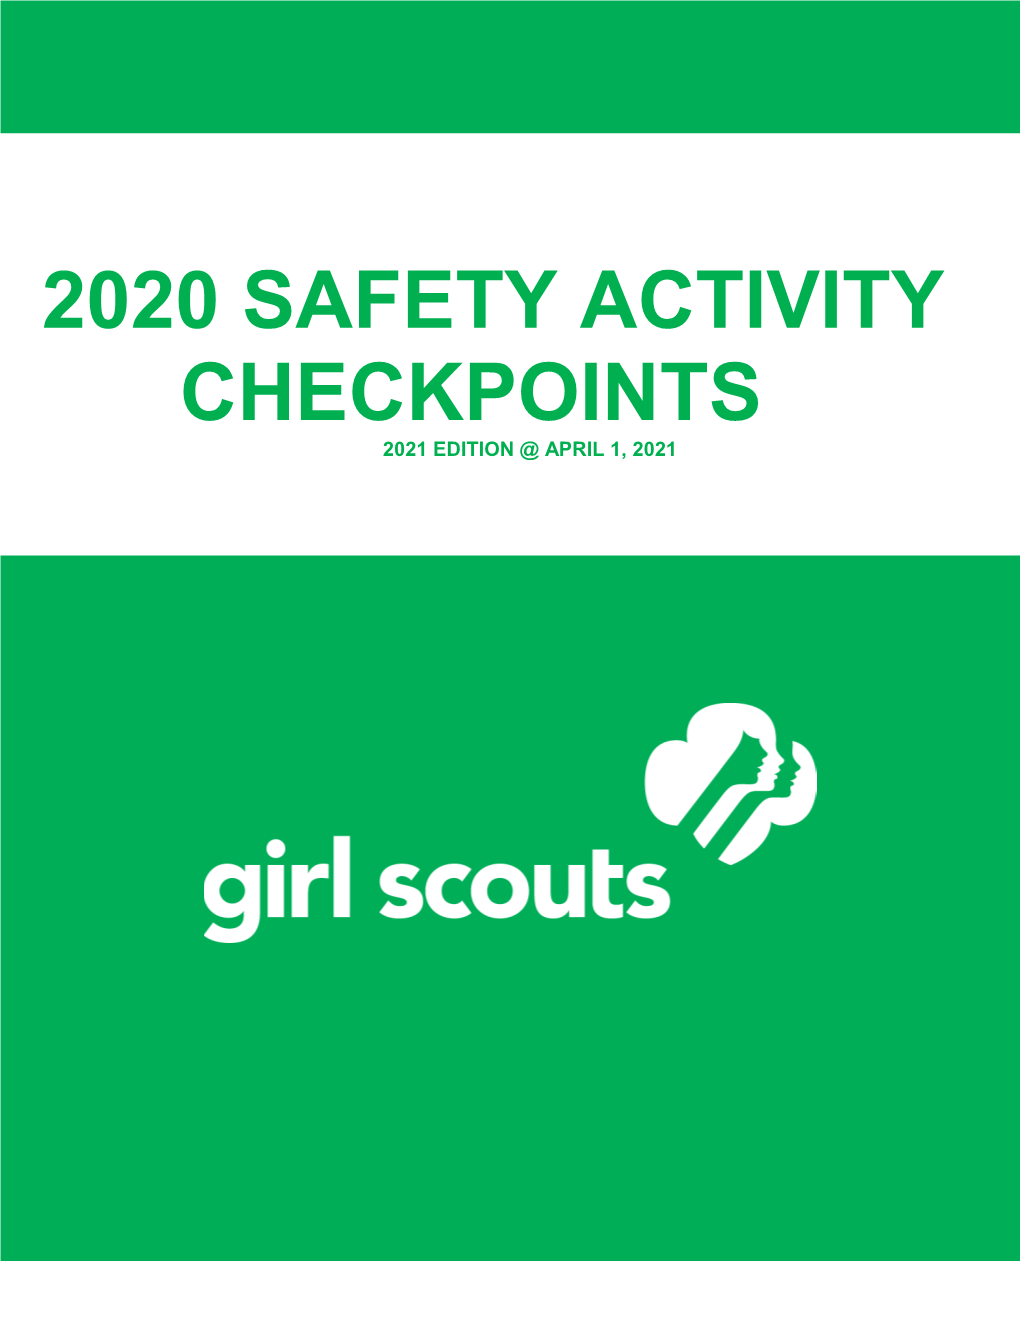 2020 Safety Activity Checkpoints 2021 Edition @ April 1, 2021